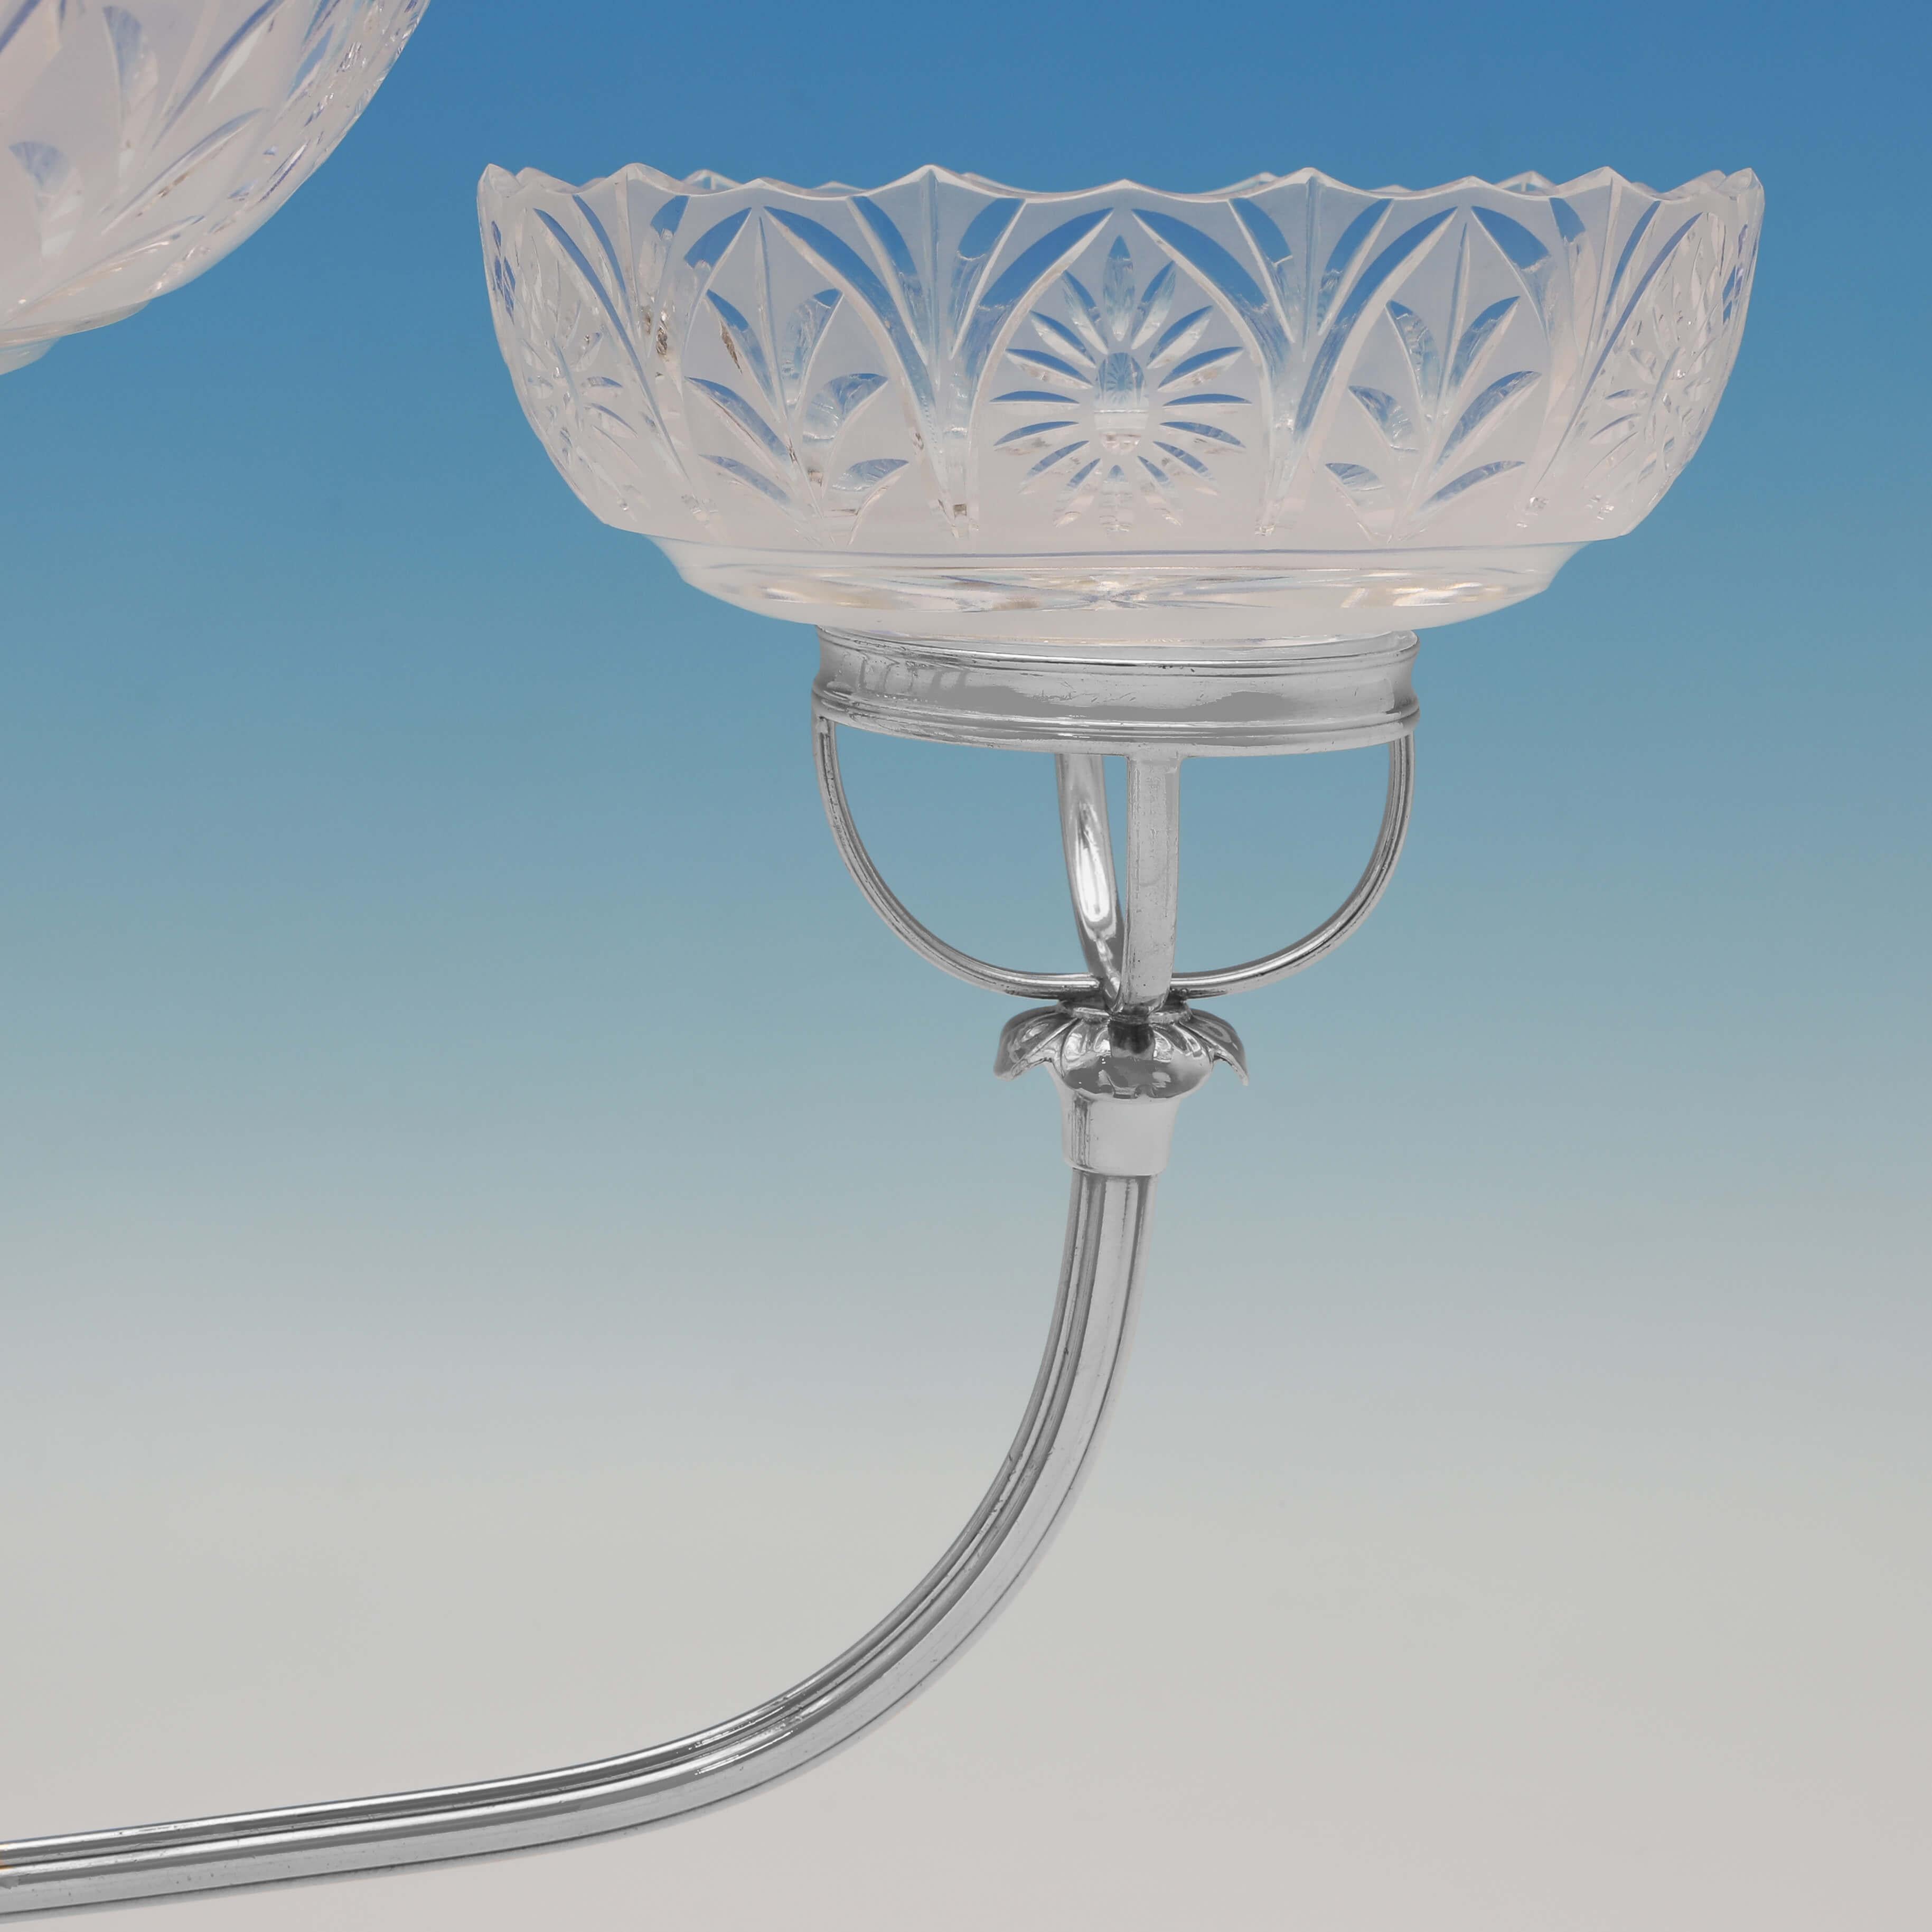 English Regency Period Old Sheffield Plate Epergne or Centrepiece, Made circa 1815 For Sale